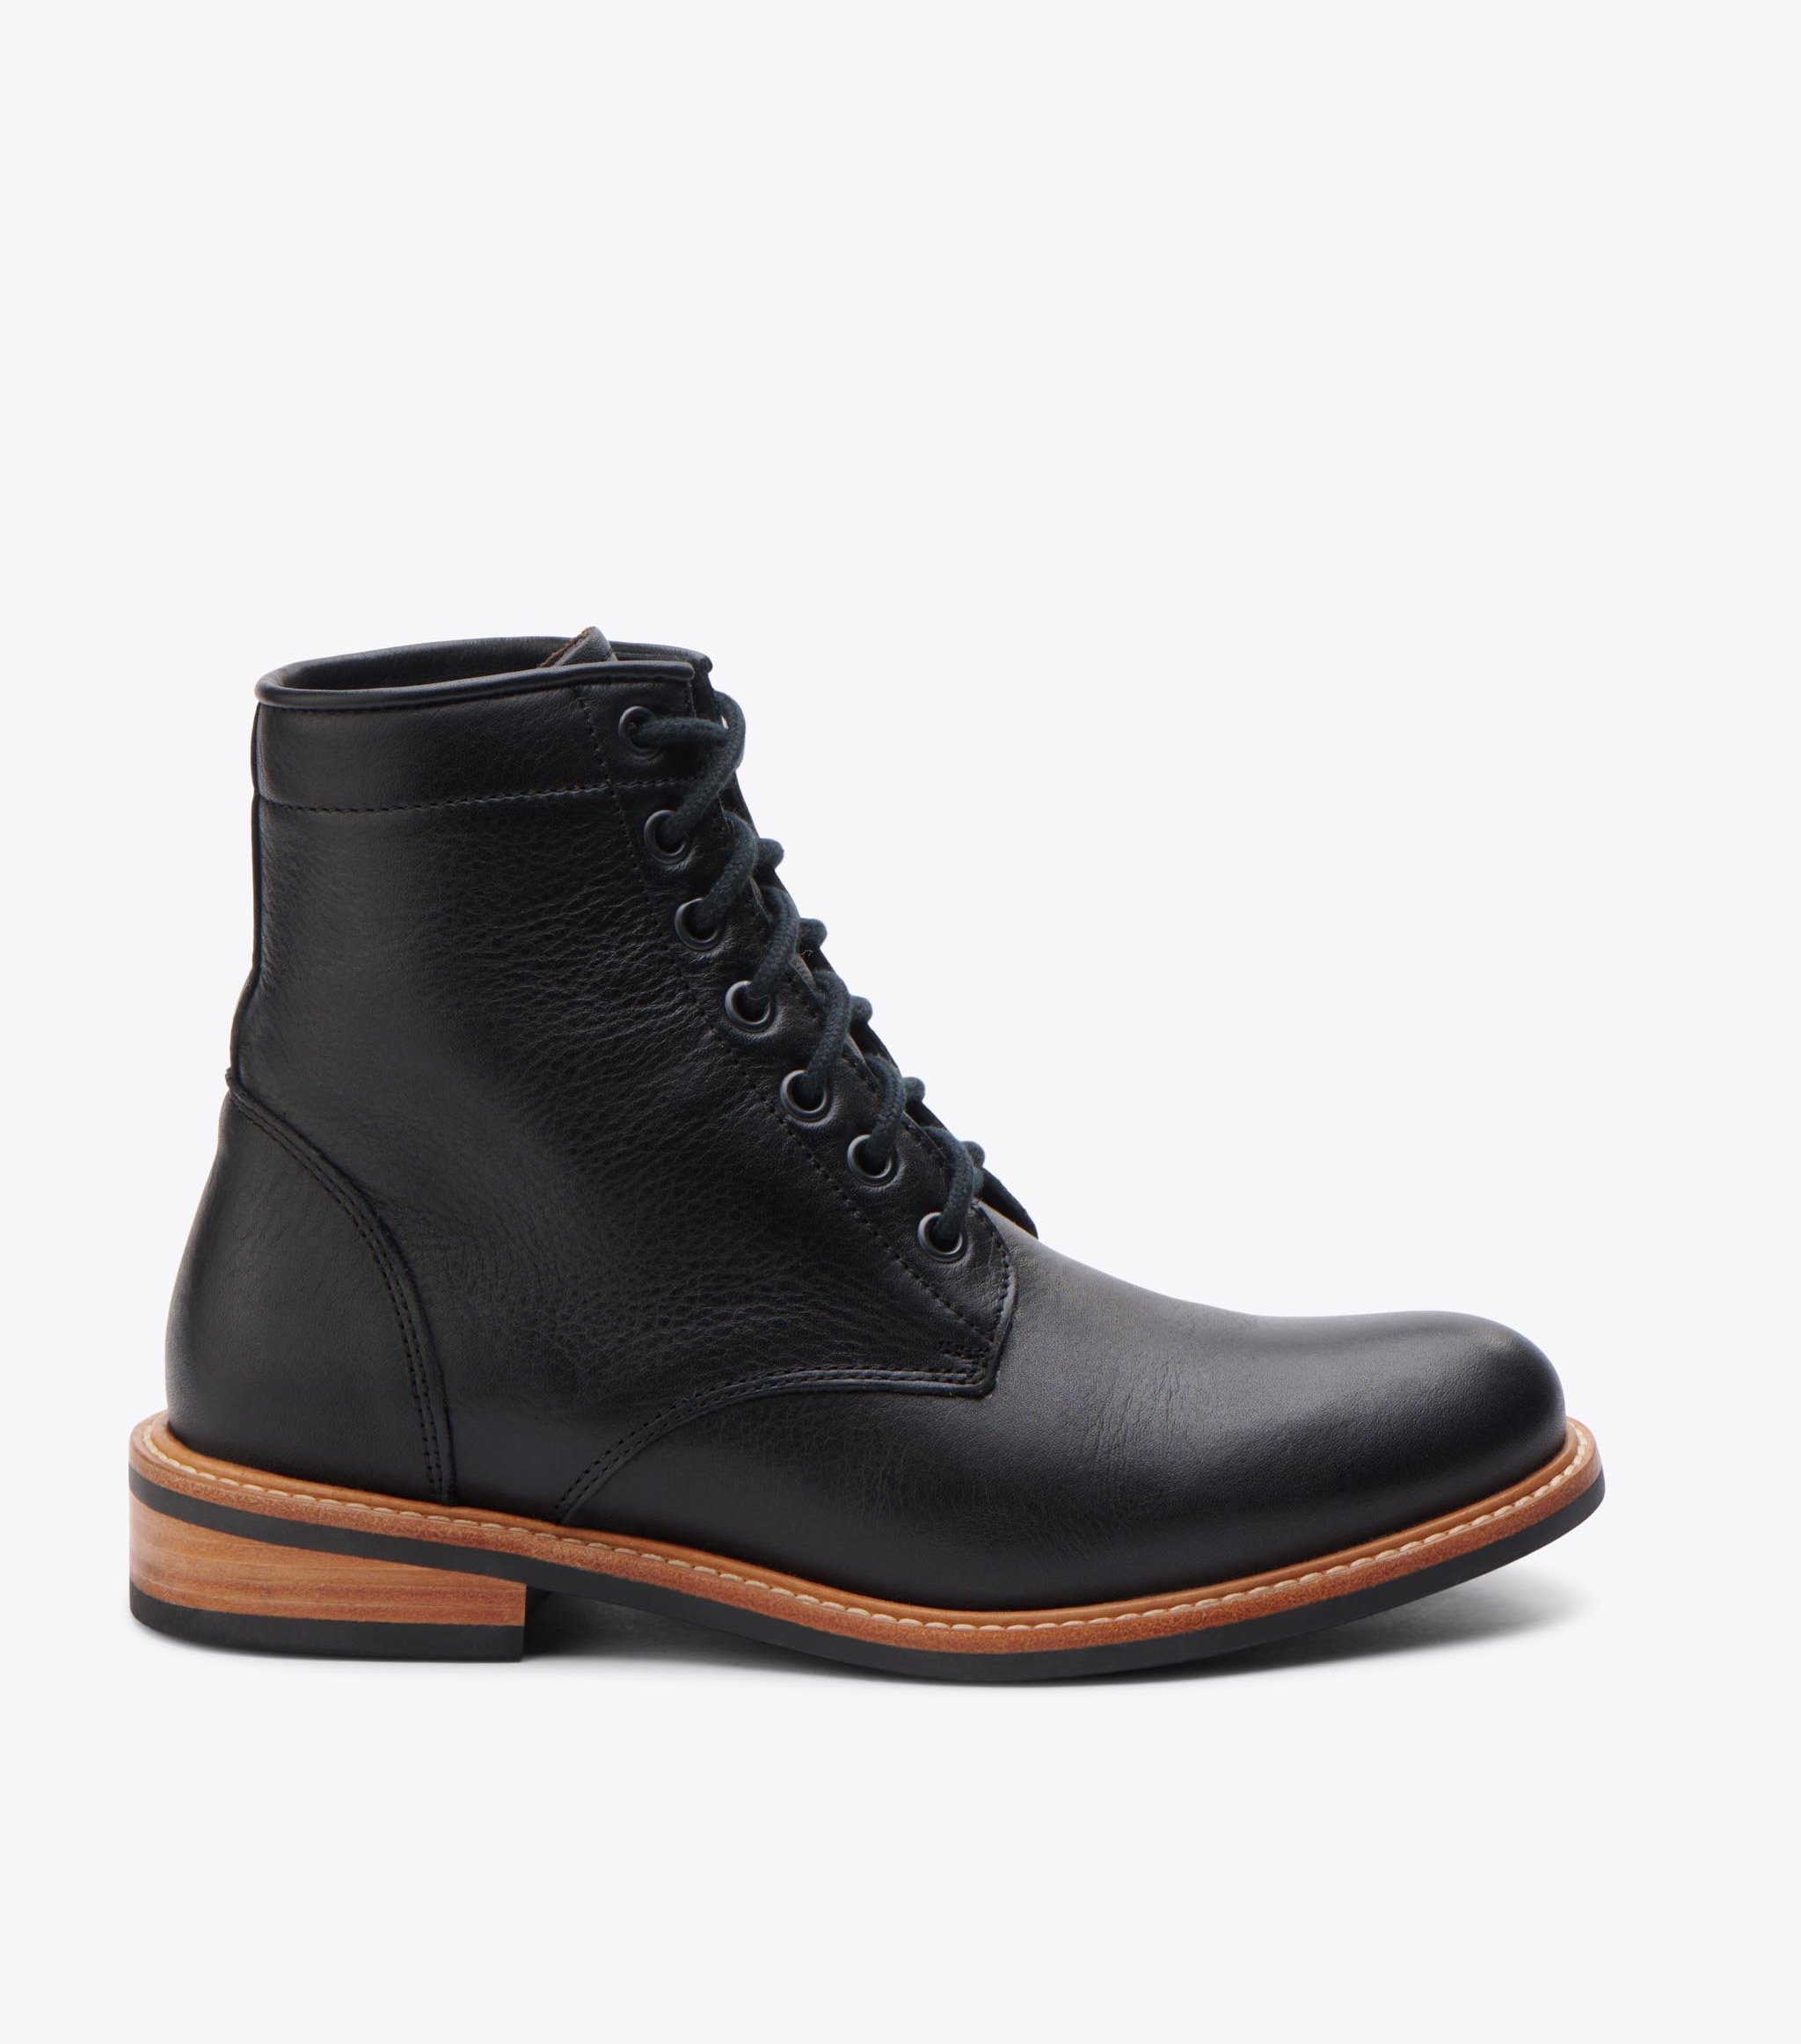 Nisolo All-Weather Amalia Boot Black - Every Nisolo product is built on the foundation of comfort, function, and design. 